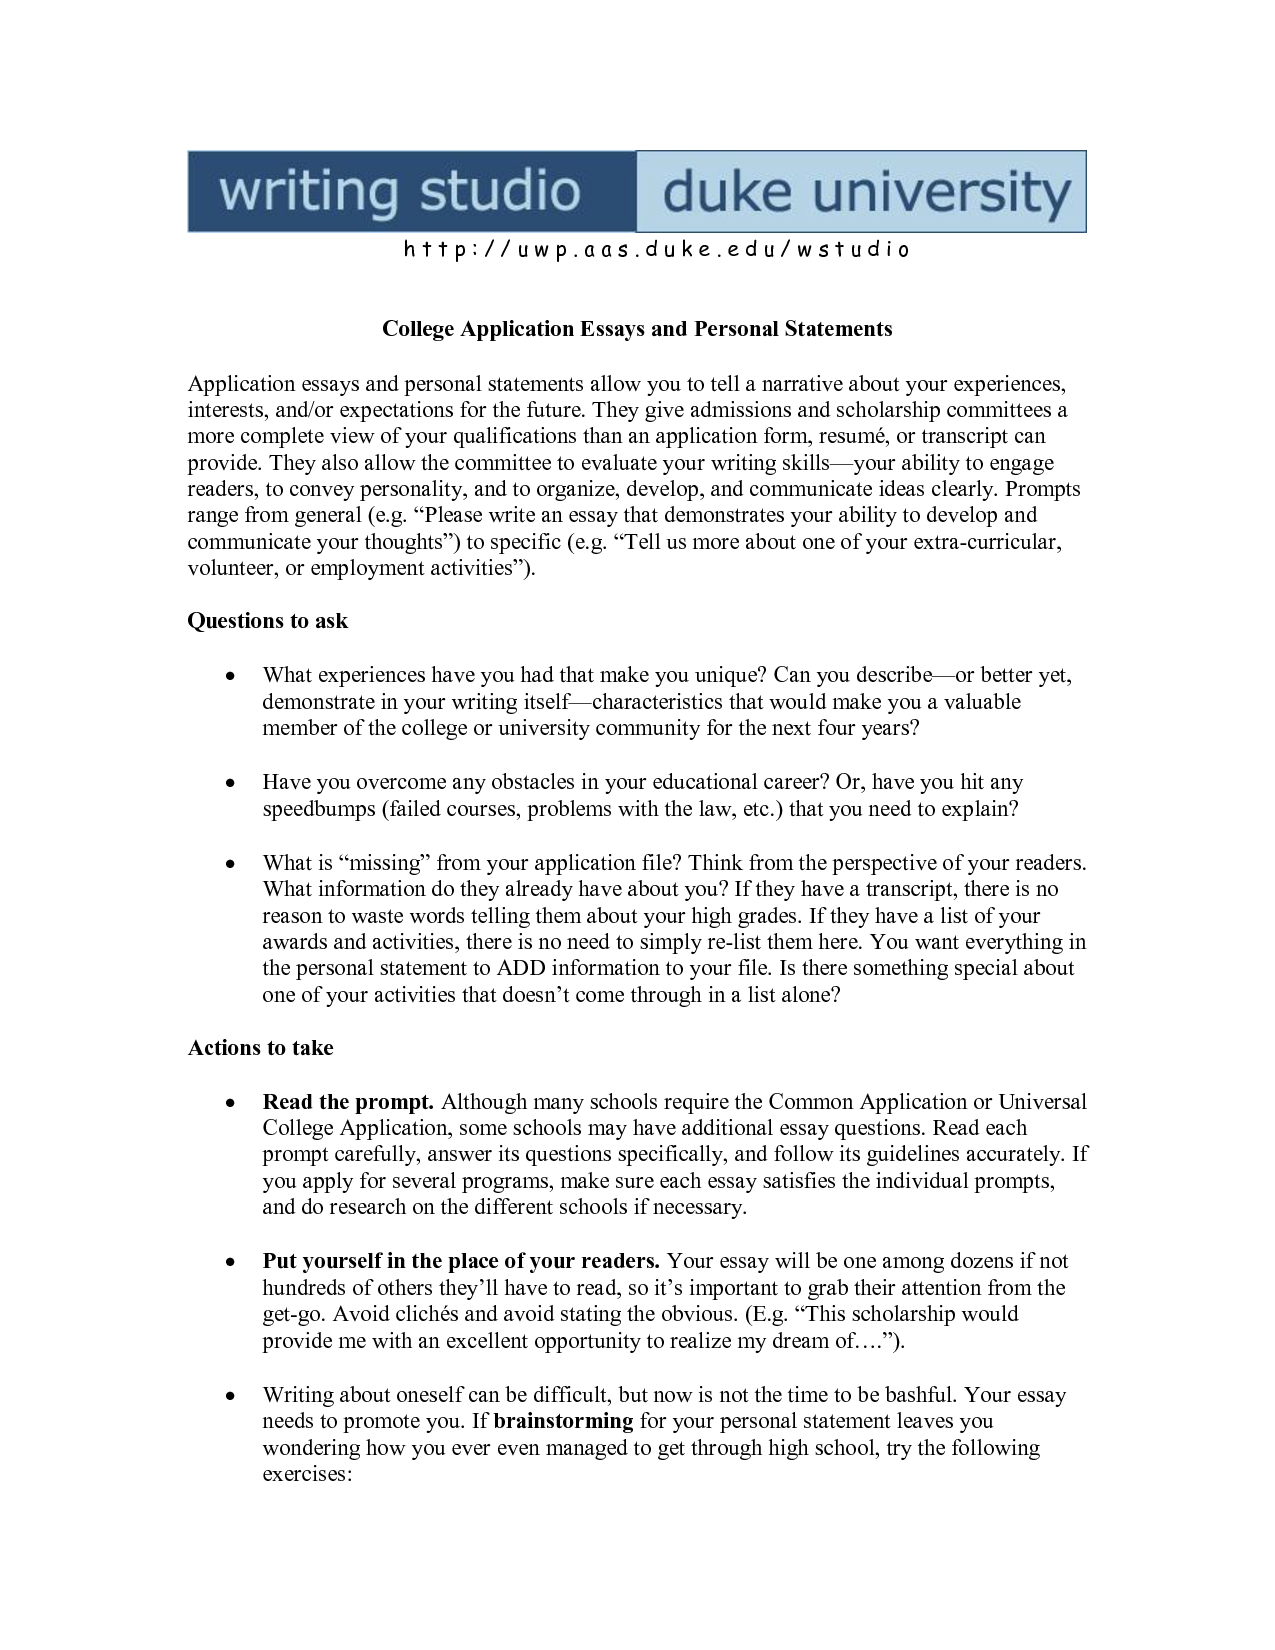 Writing personal essay for college admission short